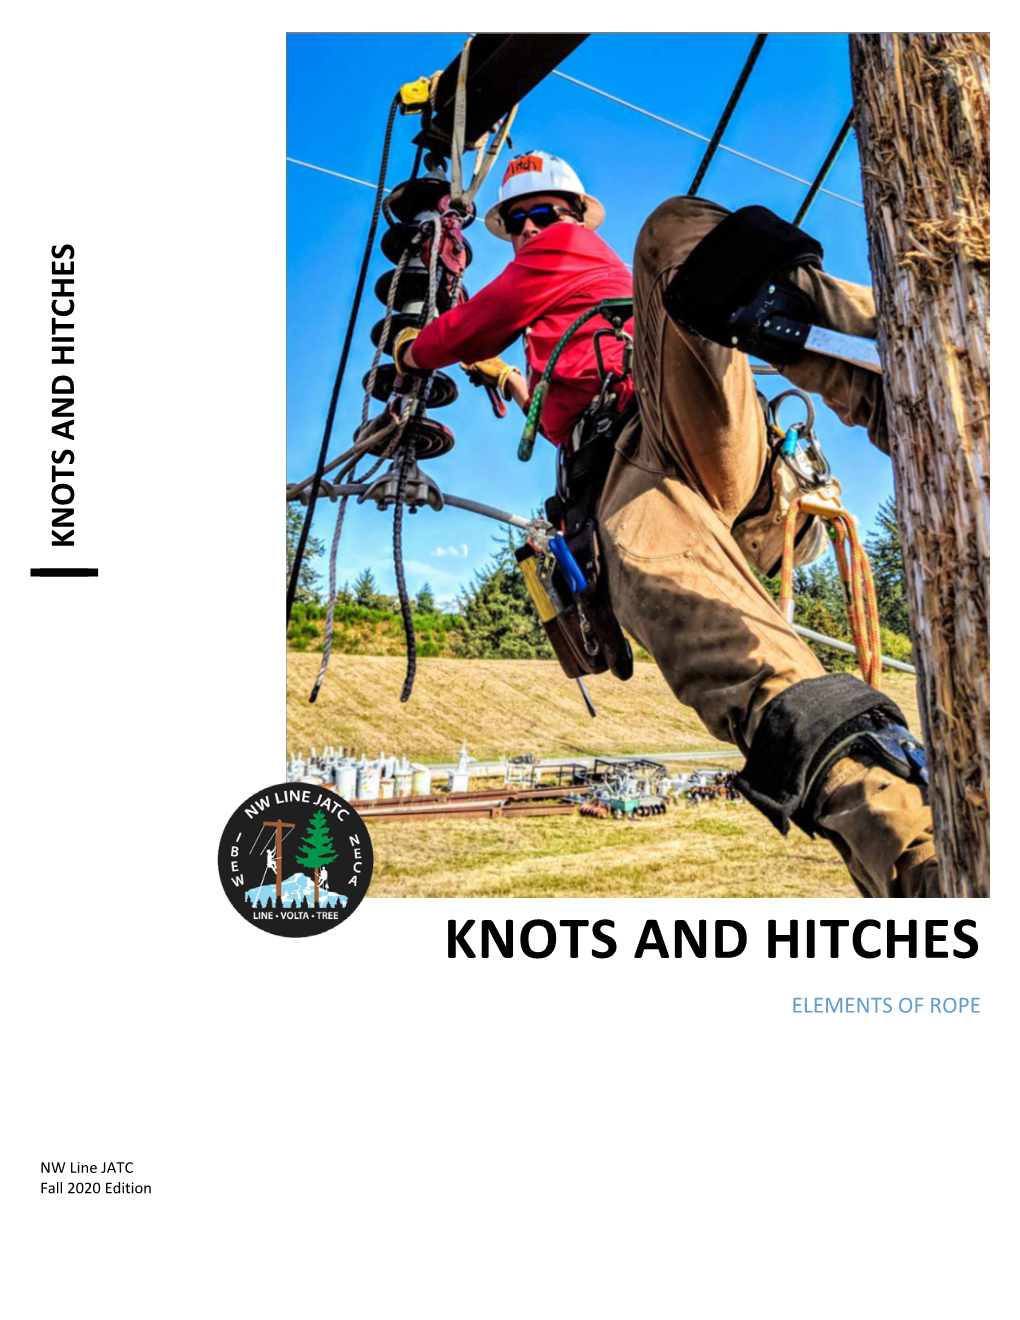 Knots and Hitches Jatc Knots and Hitches and Knots